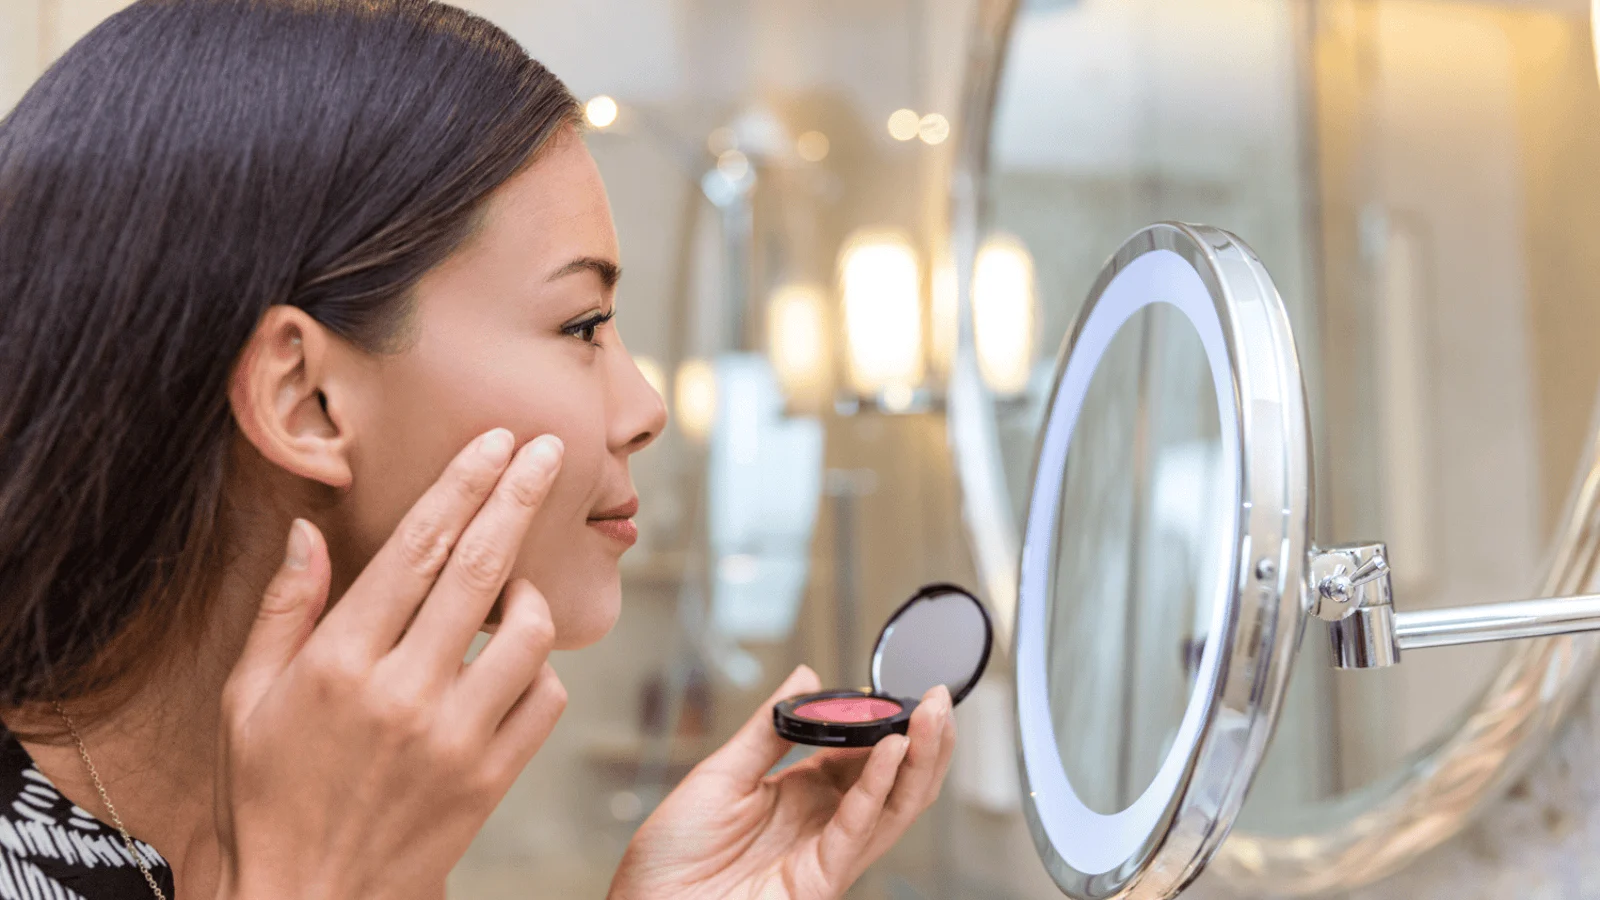 Aging makeup mistakes